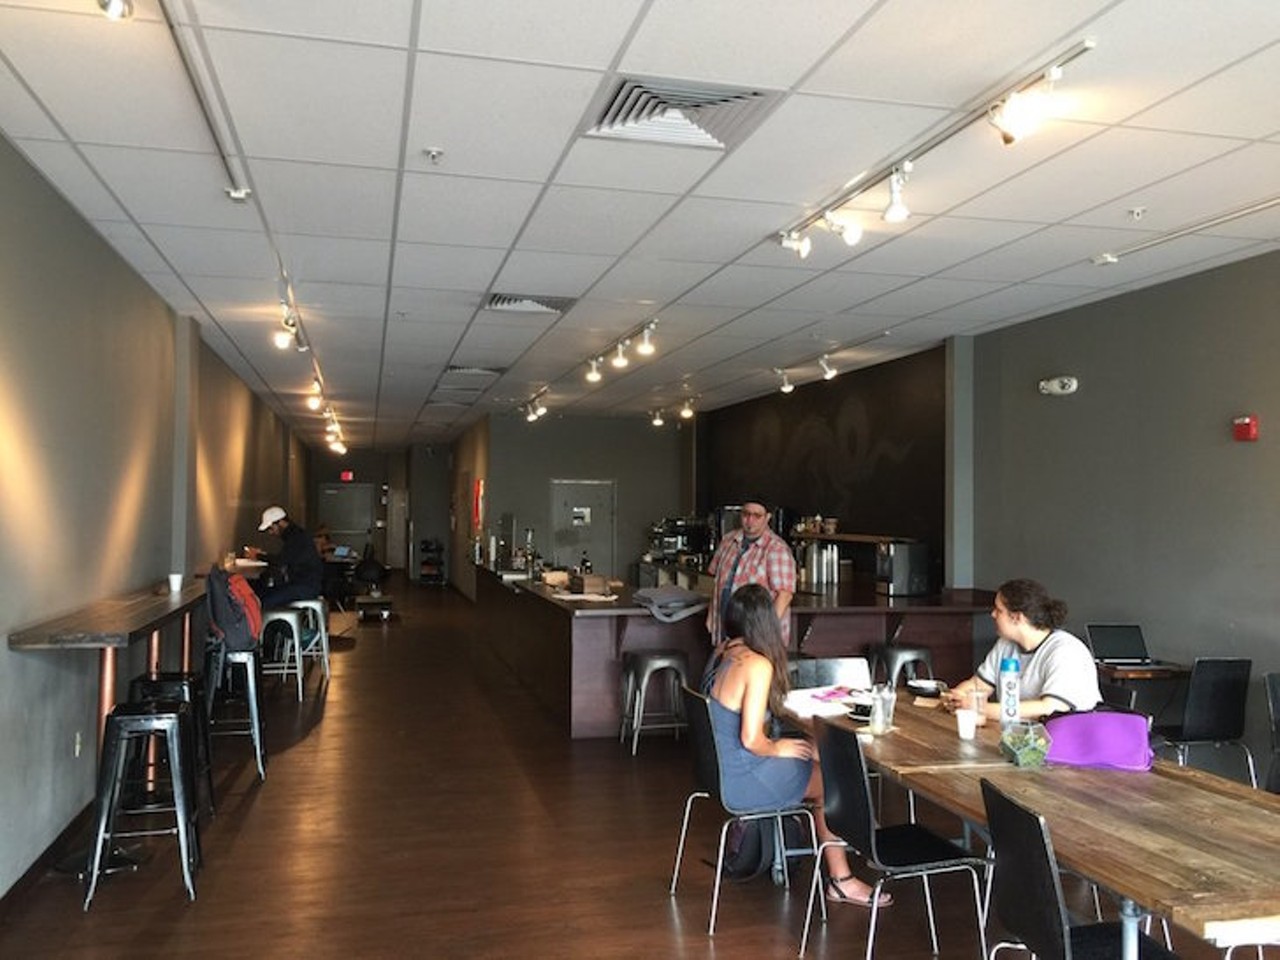 Vespr  
626 N. Alafaya Trail, 407-476-3093
The modern ambience of Vespr is perfect to try one of their specialty lattes or a cold brew. If you&#146;re not feeling coffee, they also serve up wine and beer to relieve the tension of the day.
Photo via Yelp/Peter S.